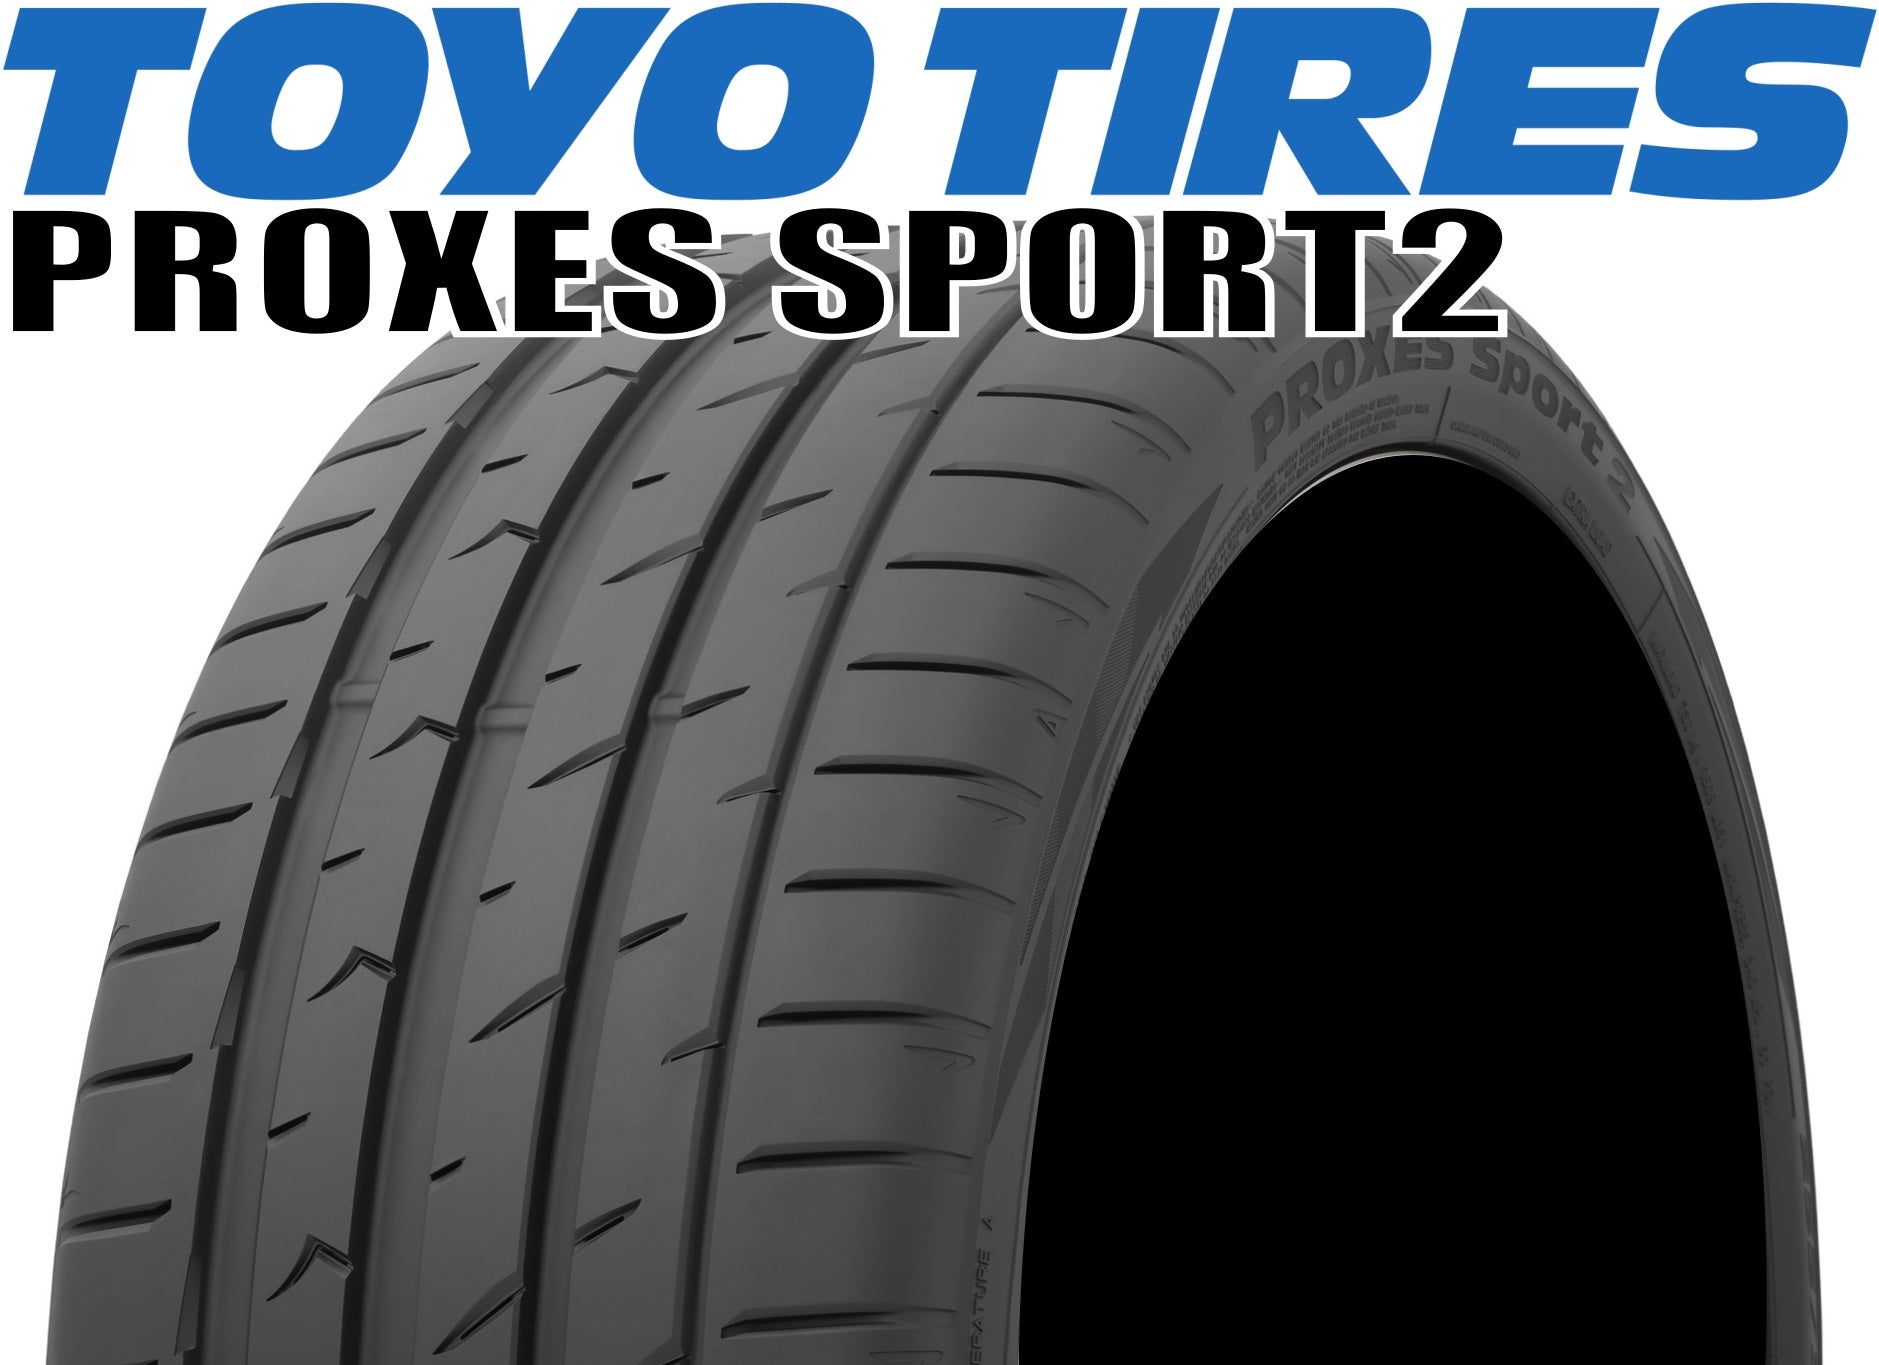 TOYO TIRES PROXES SPORT2(トーヨー プロクセススポーツ) 215/55R17 98Y XL (215/55-17 9